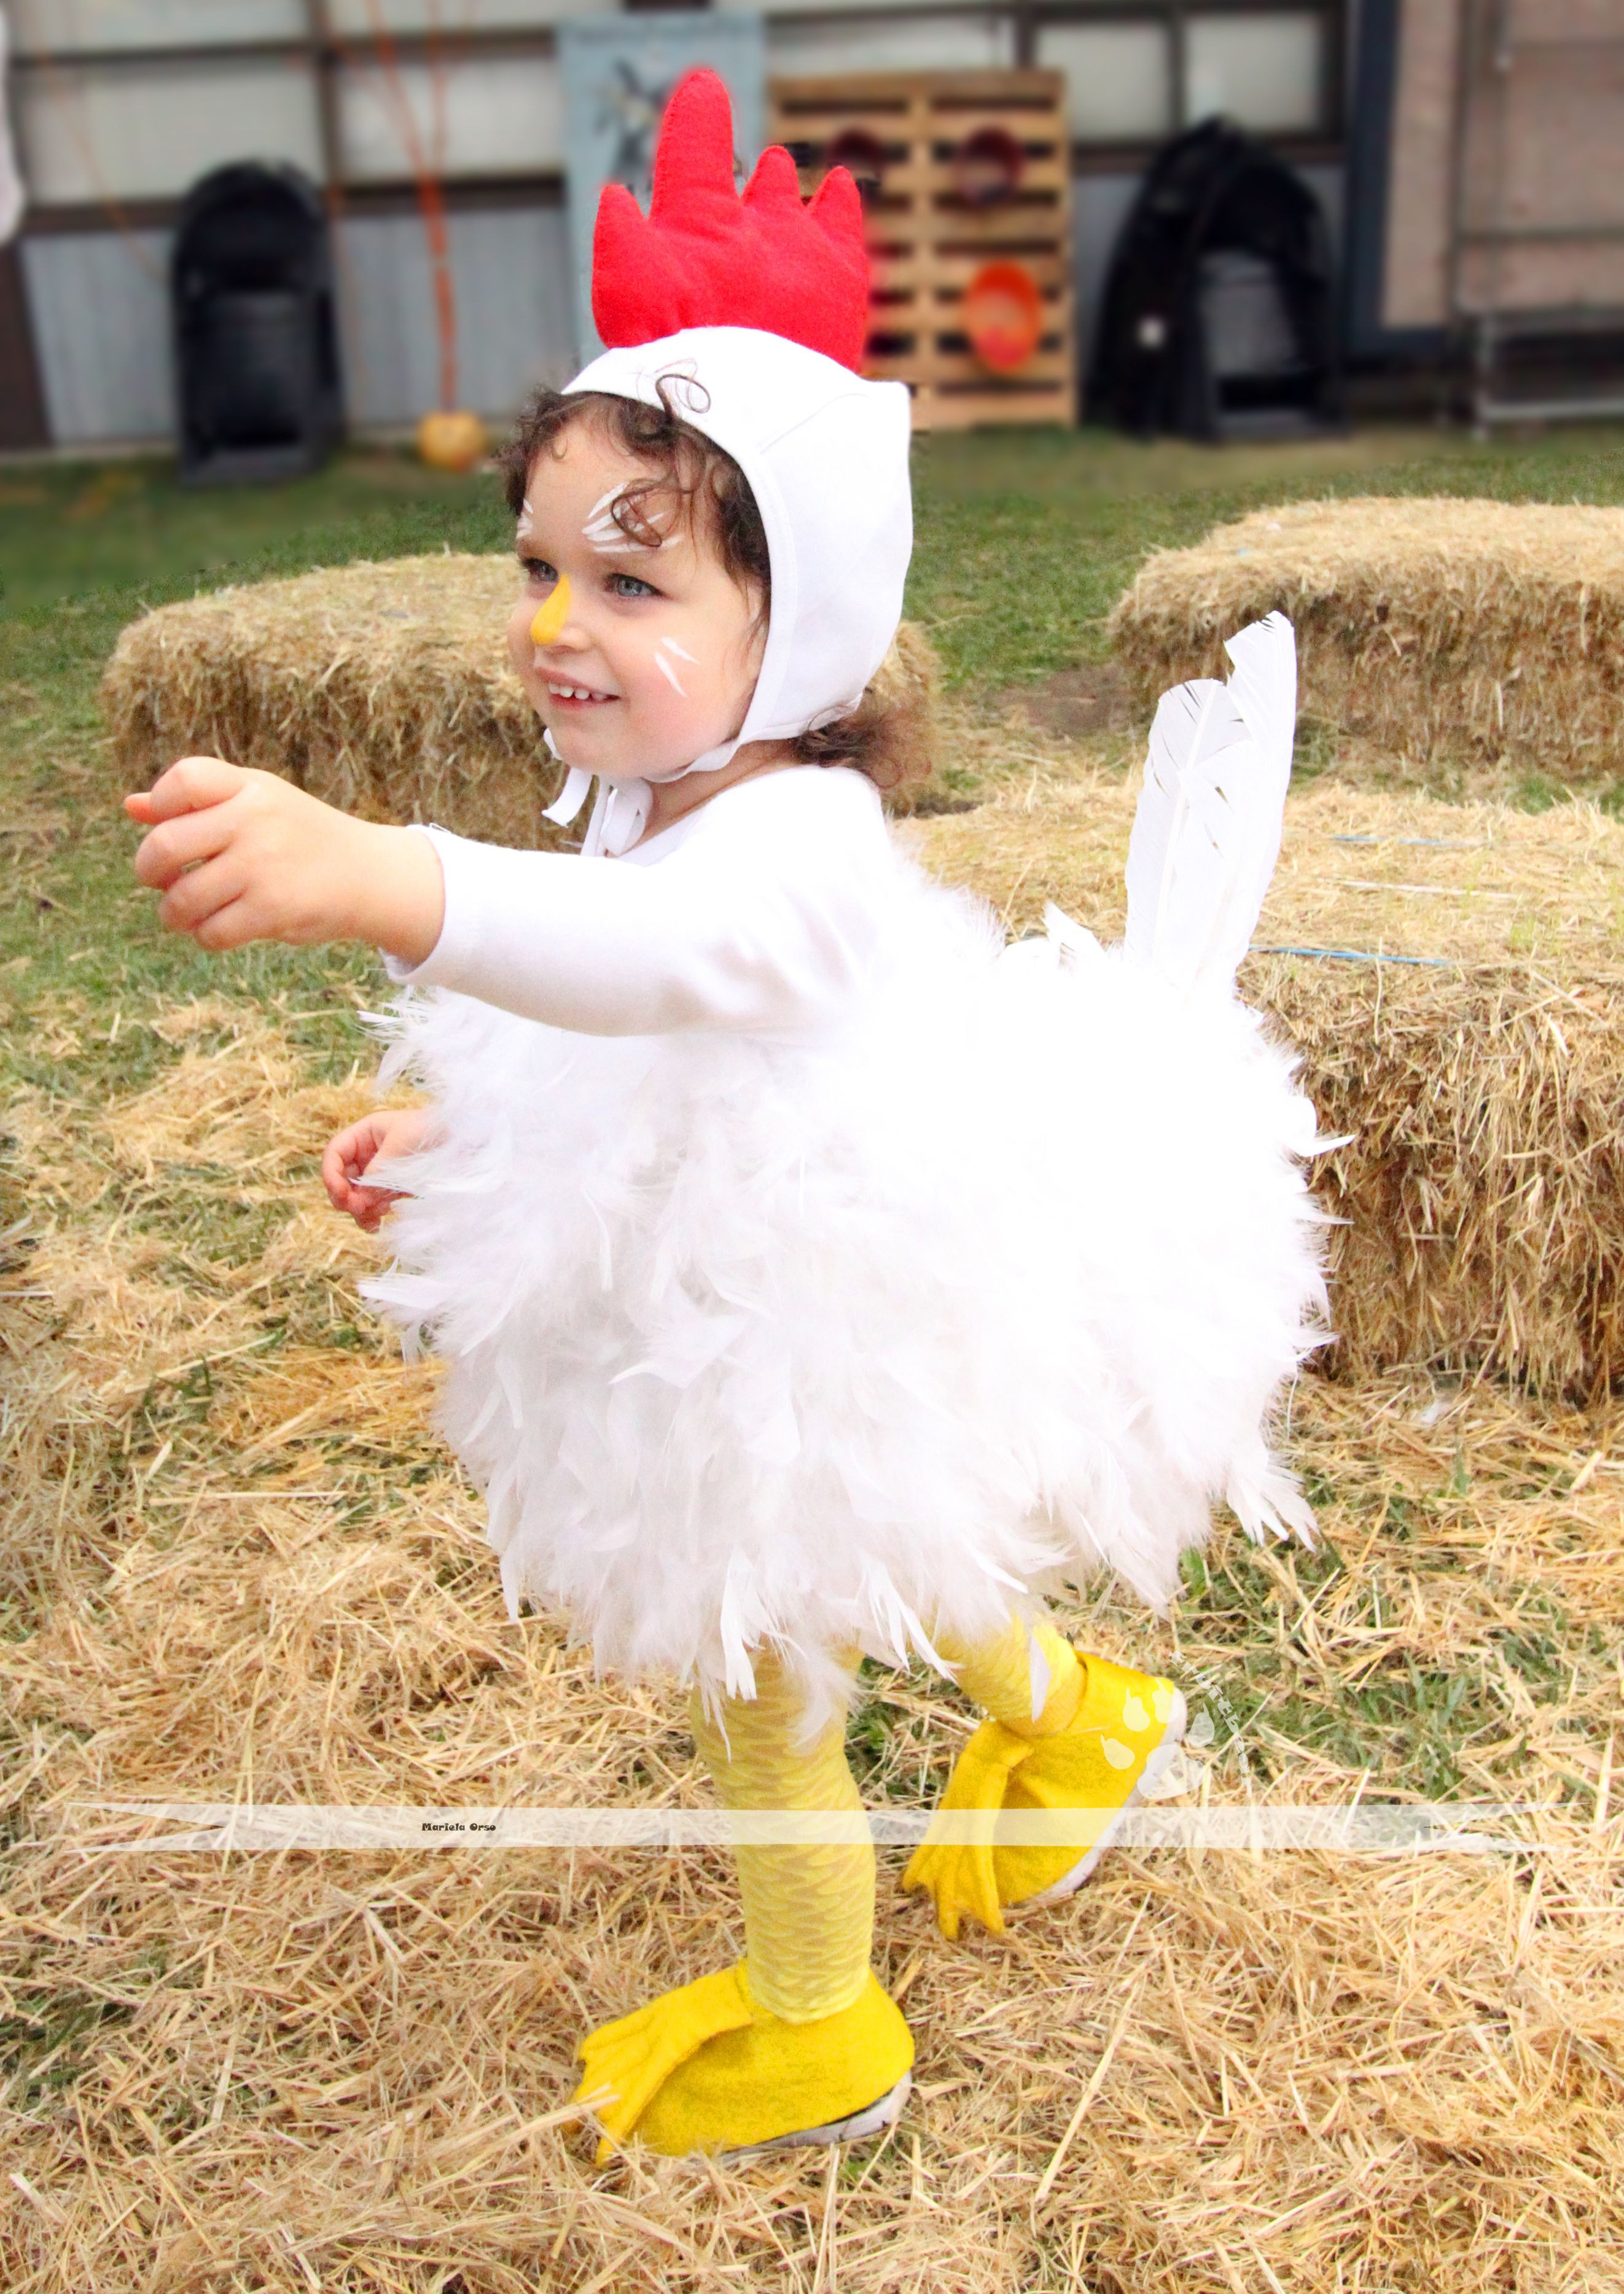 Chicken Costume DIY
 SUPER CUTE Toddler or baby funny chicken costume chikin